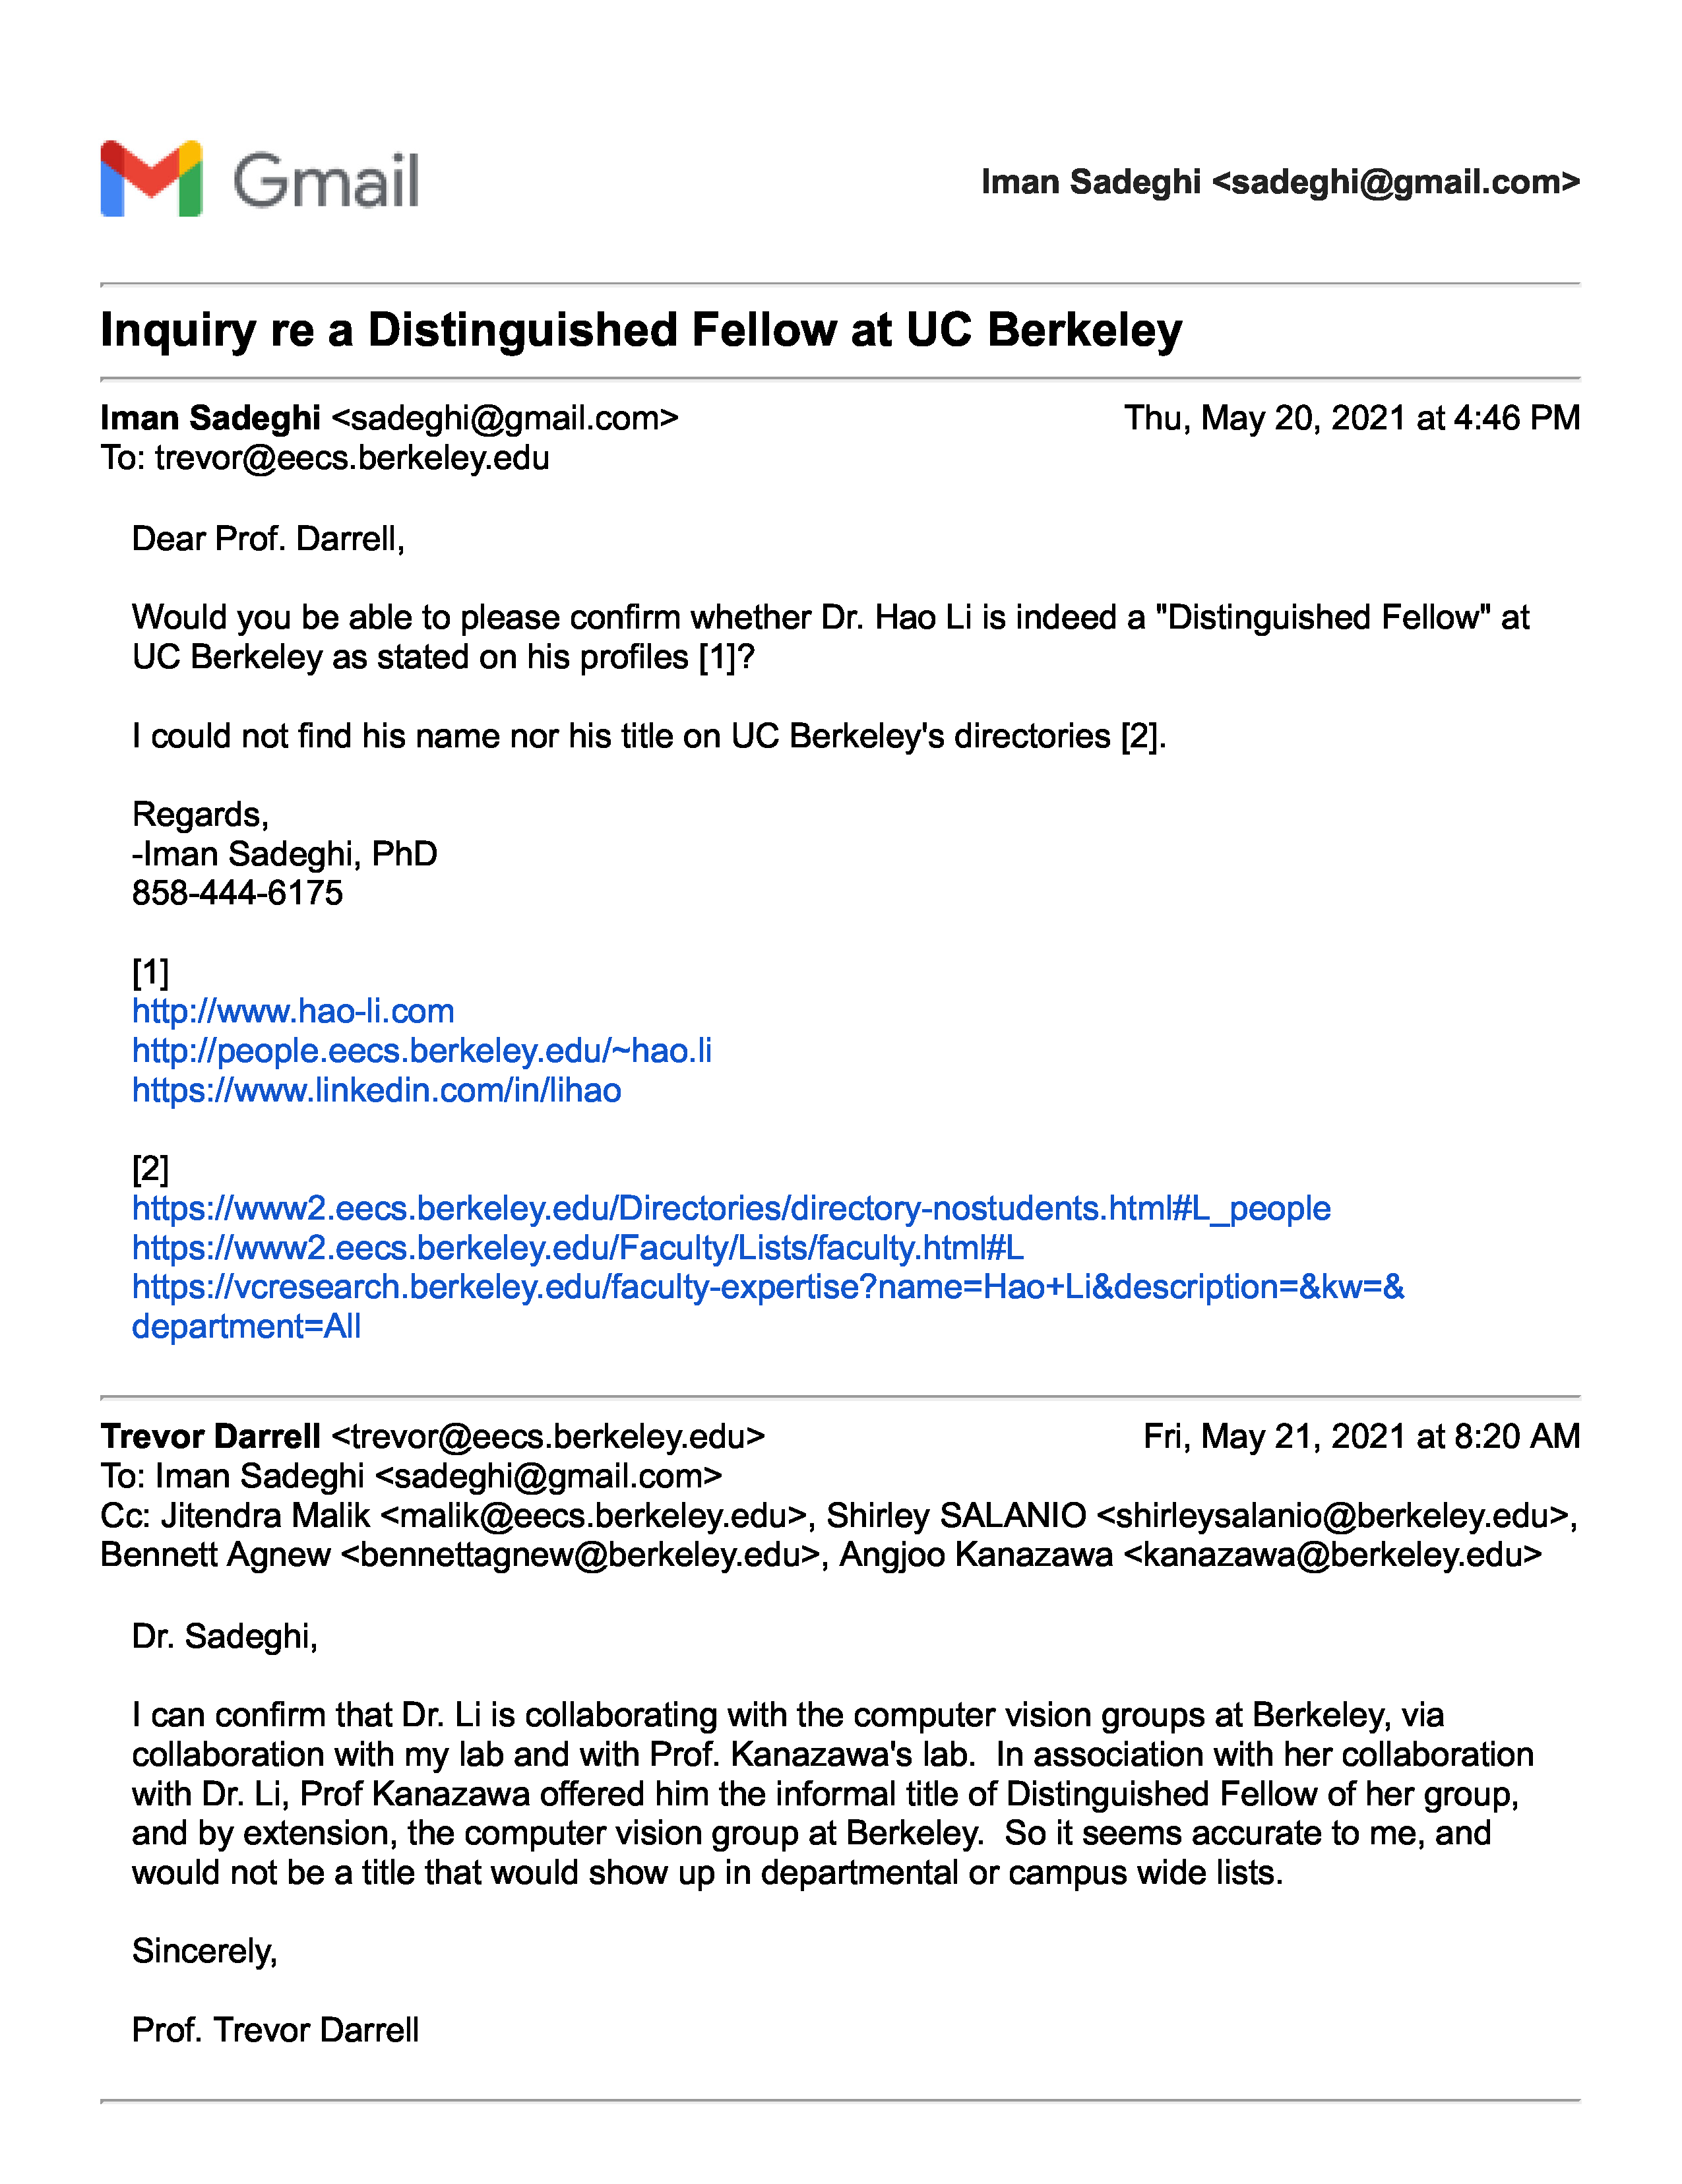 UC Berkeley Removes Hao Li's Name and Informal Title Amid USC Report Page 1